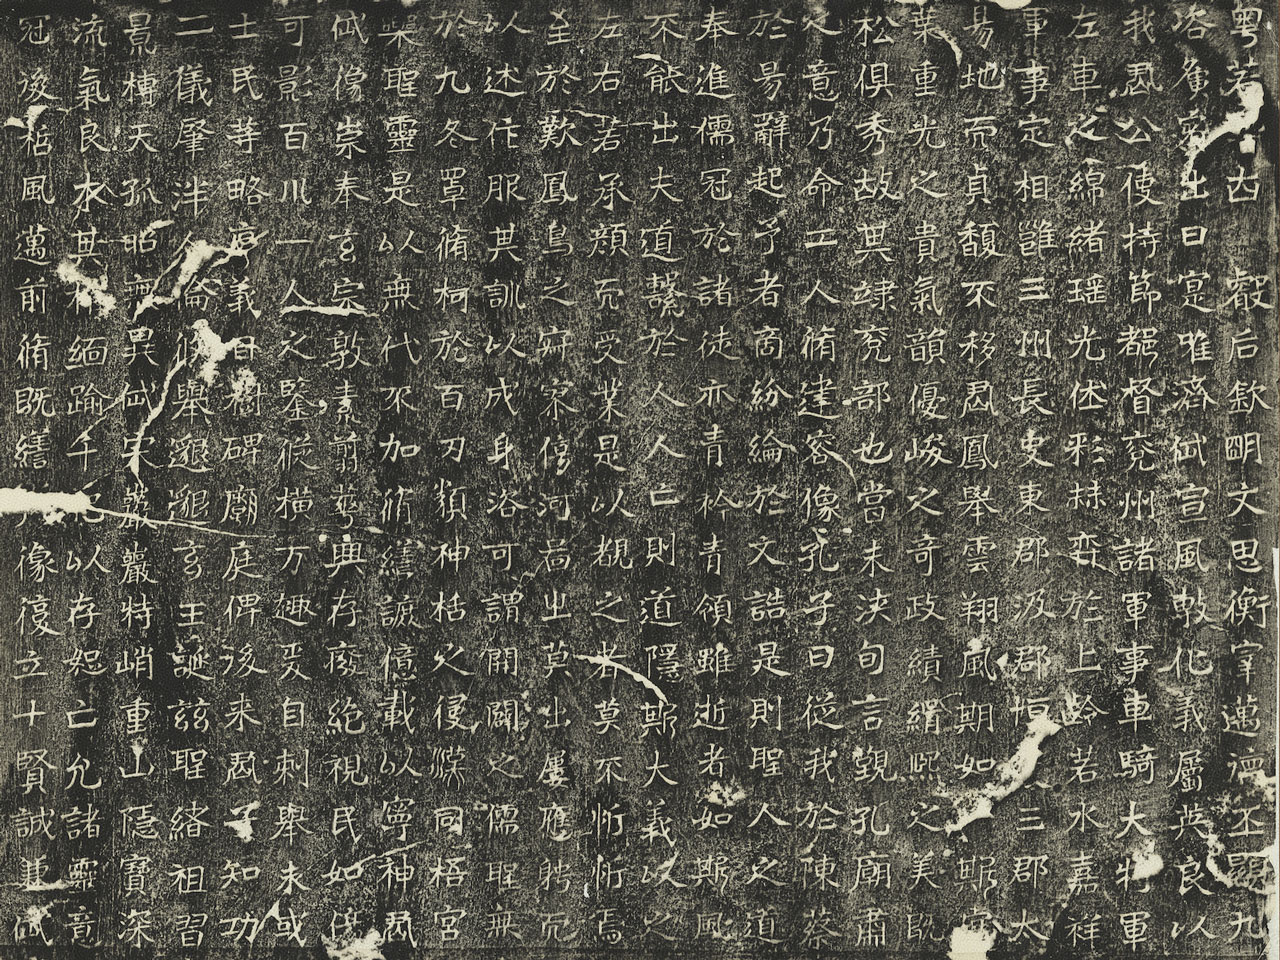 Rubbing of the Li Zhongxuan Stele on Repairing the Temple of Confucius